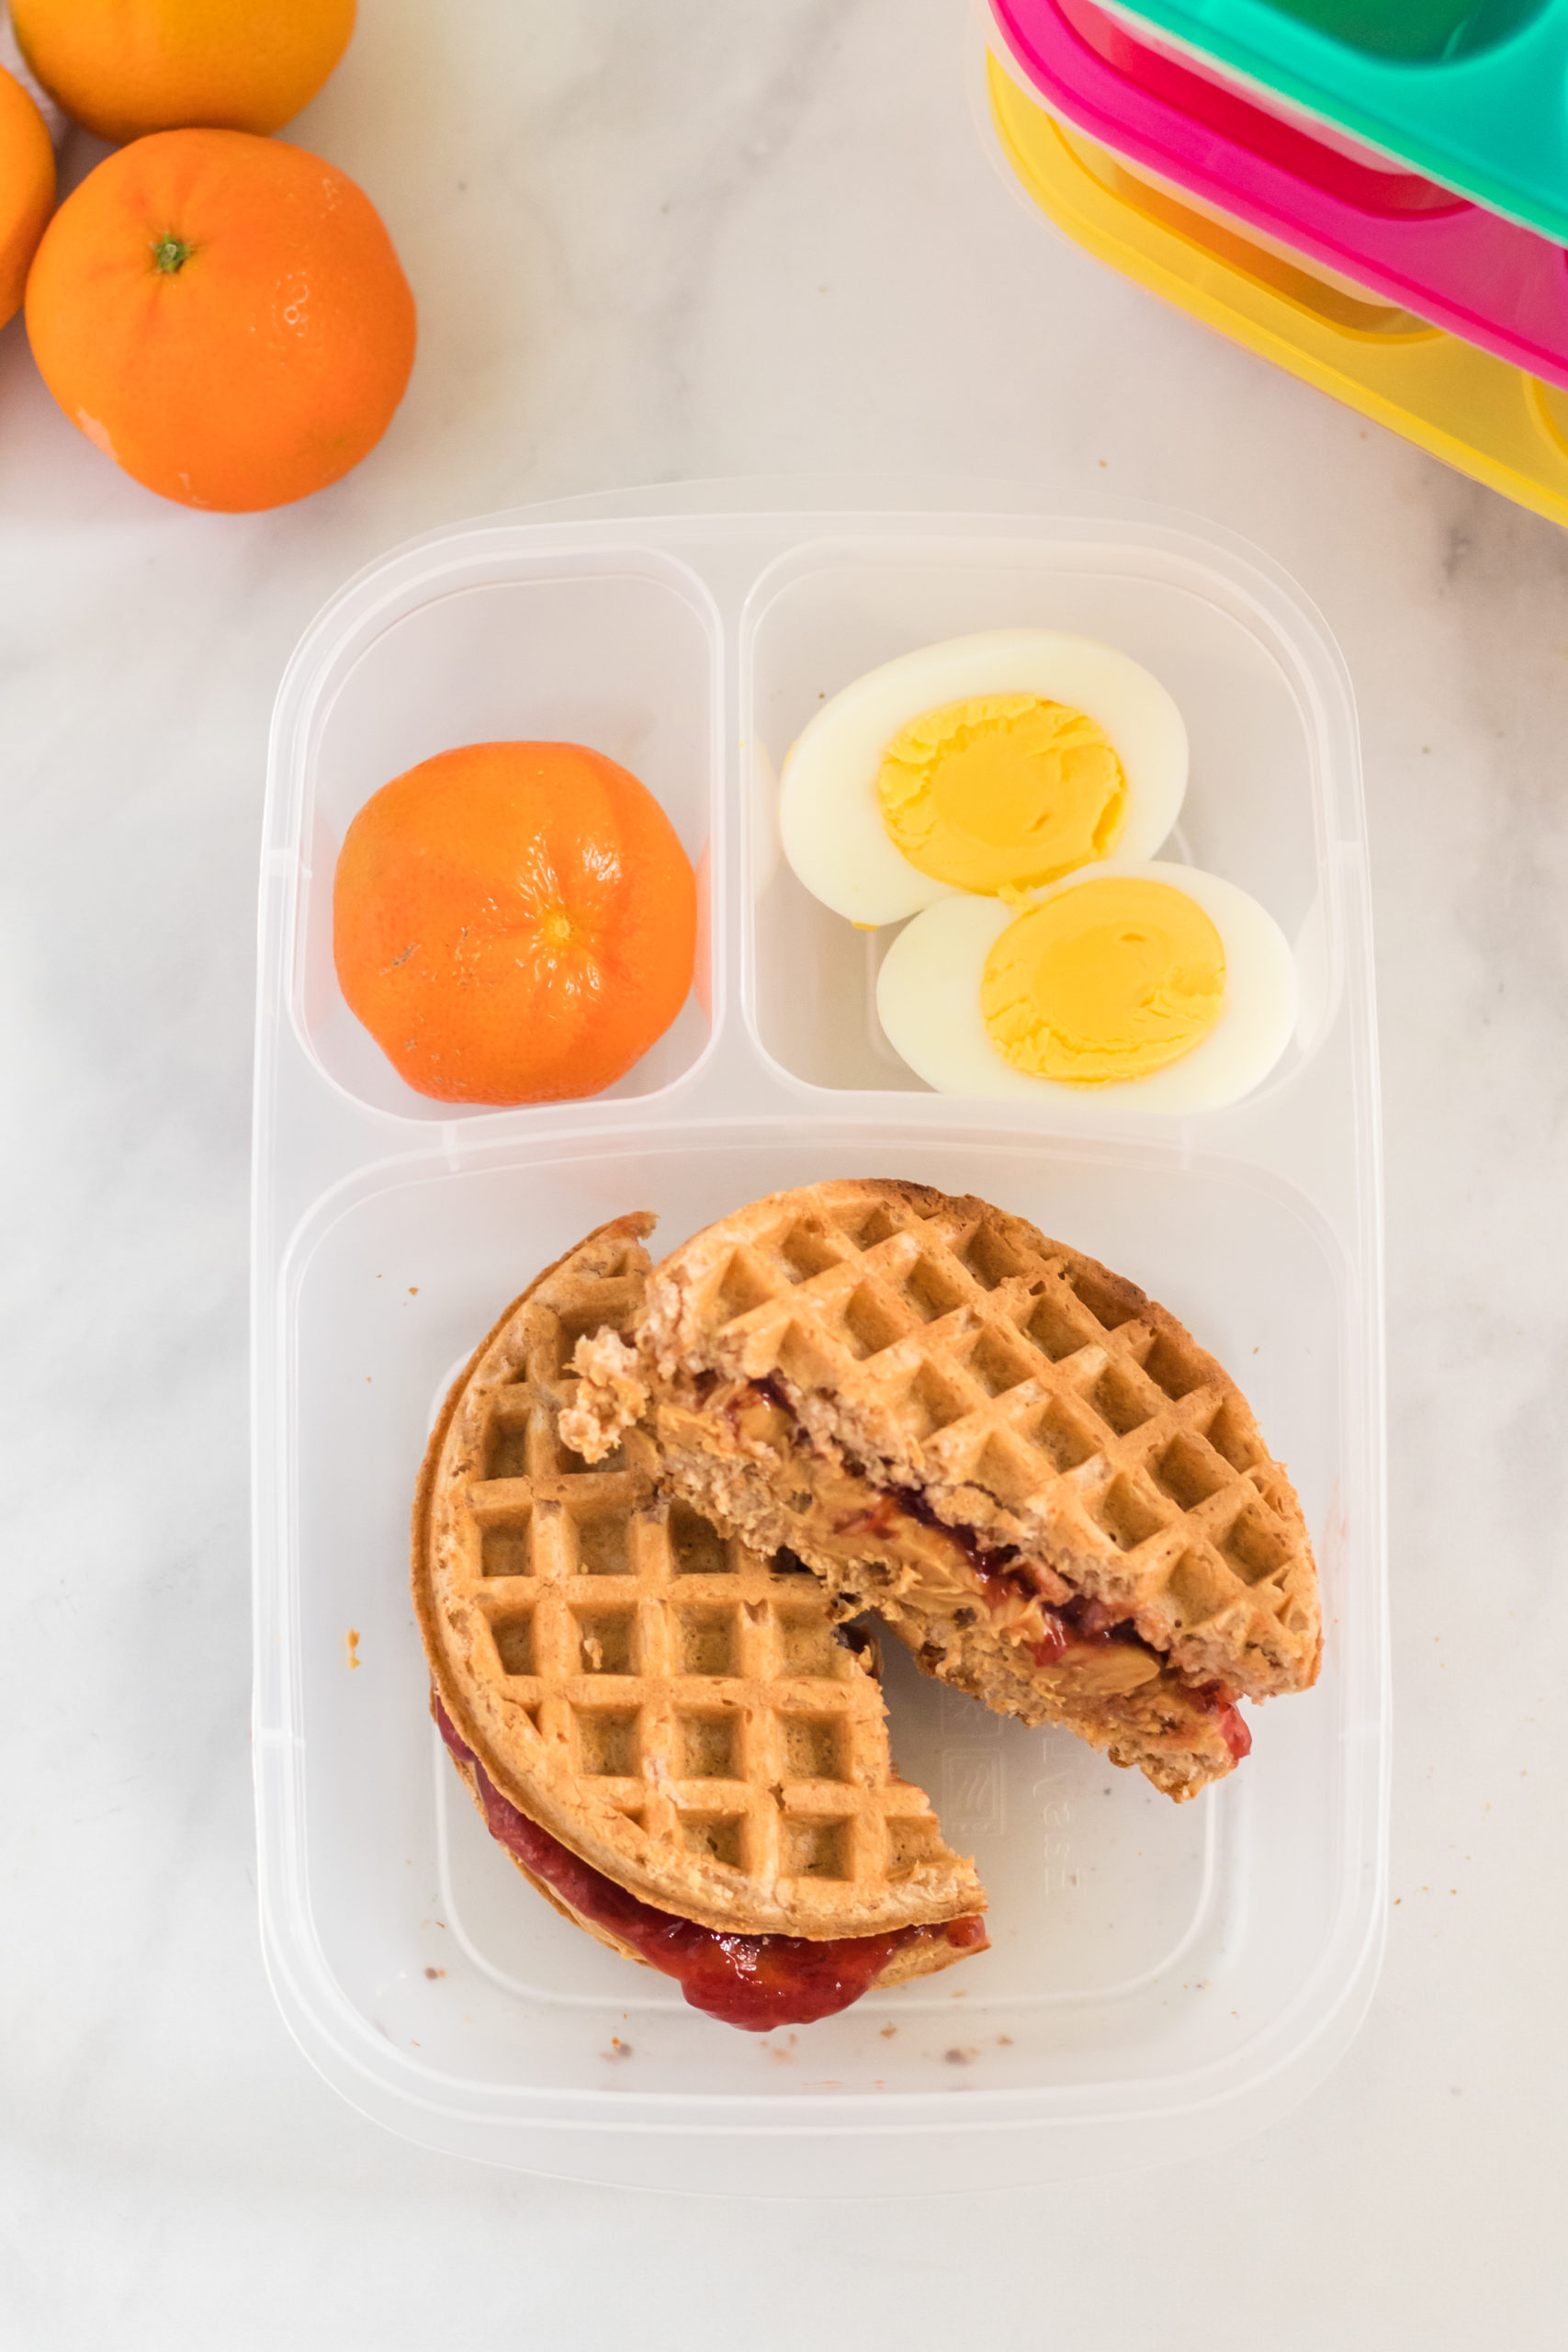 PBJ Waffle Sandwich packed in lunchbox with an orange and hard boiled egg via @familyfresh